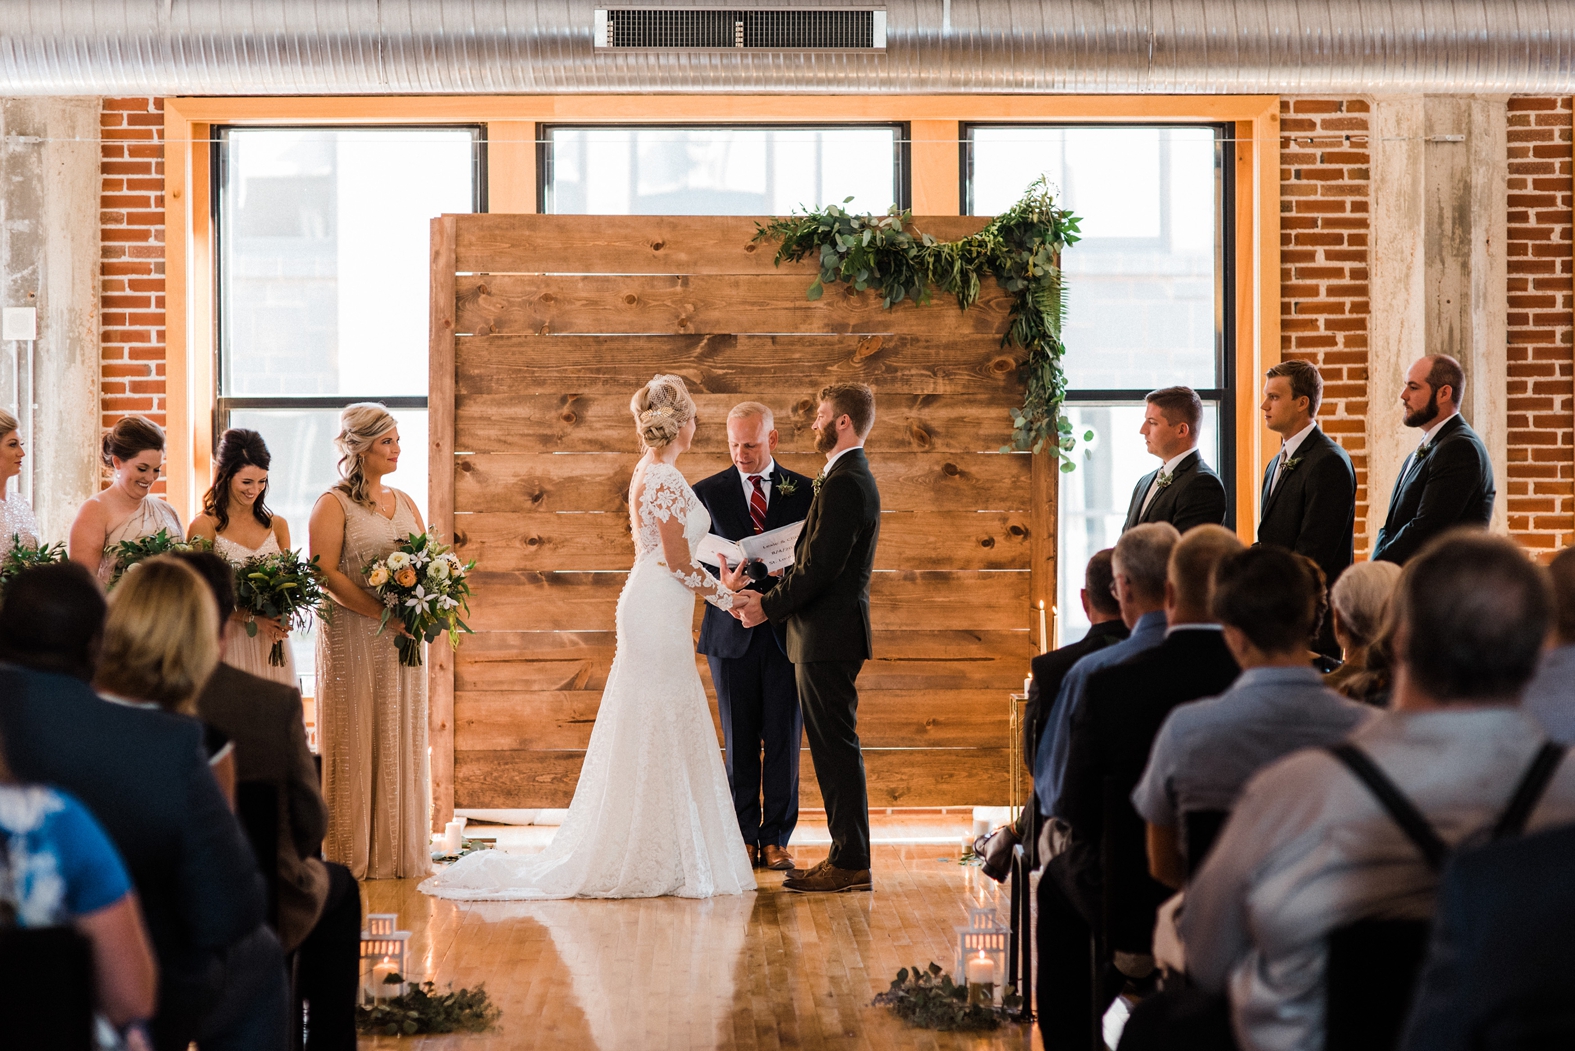 Wedding Ceremony at Windows on Washington with wood backdrop and greenery. Bride in long sleeve lace gown; groom in olive green suit.